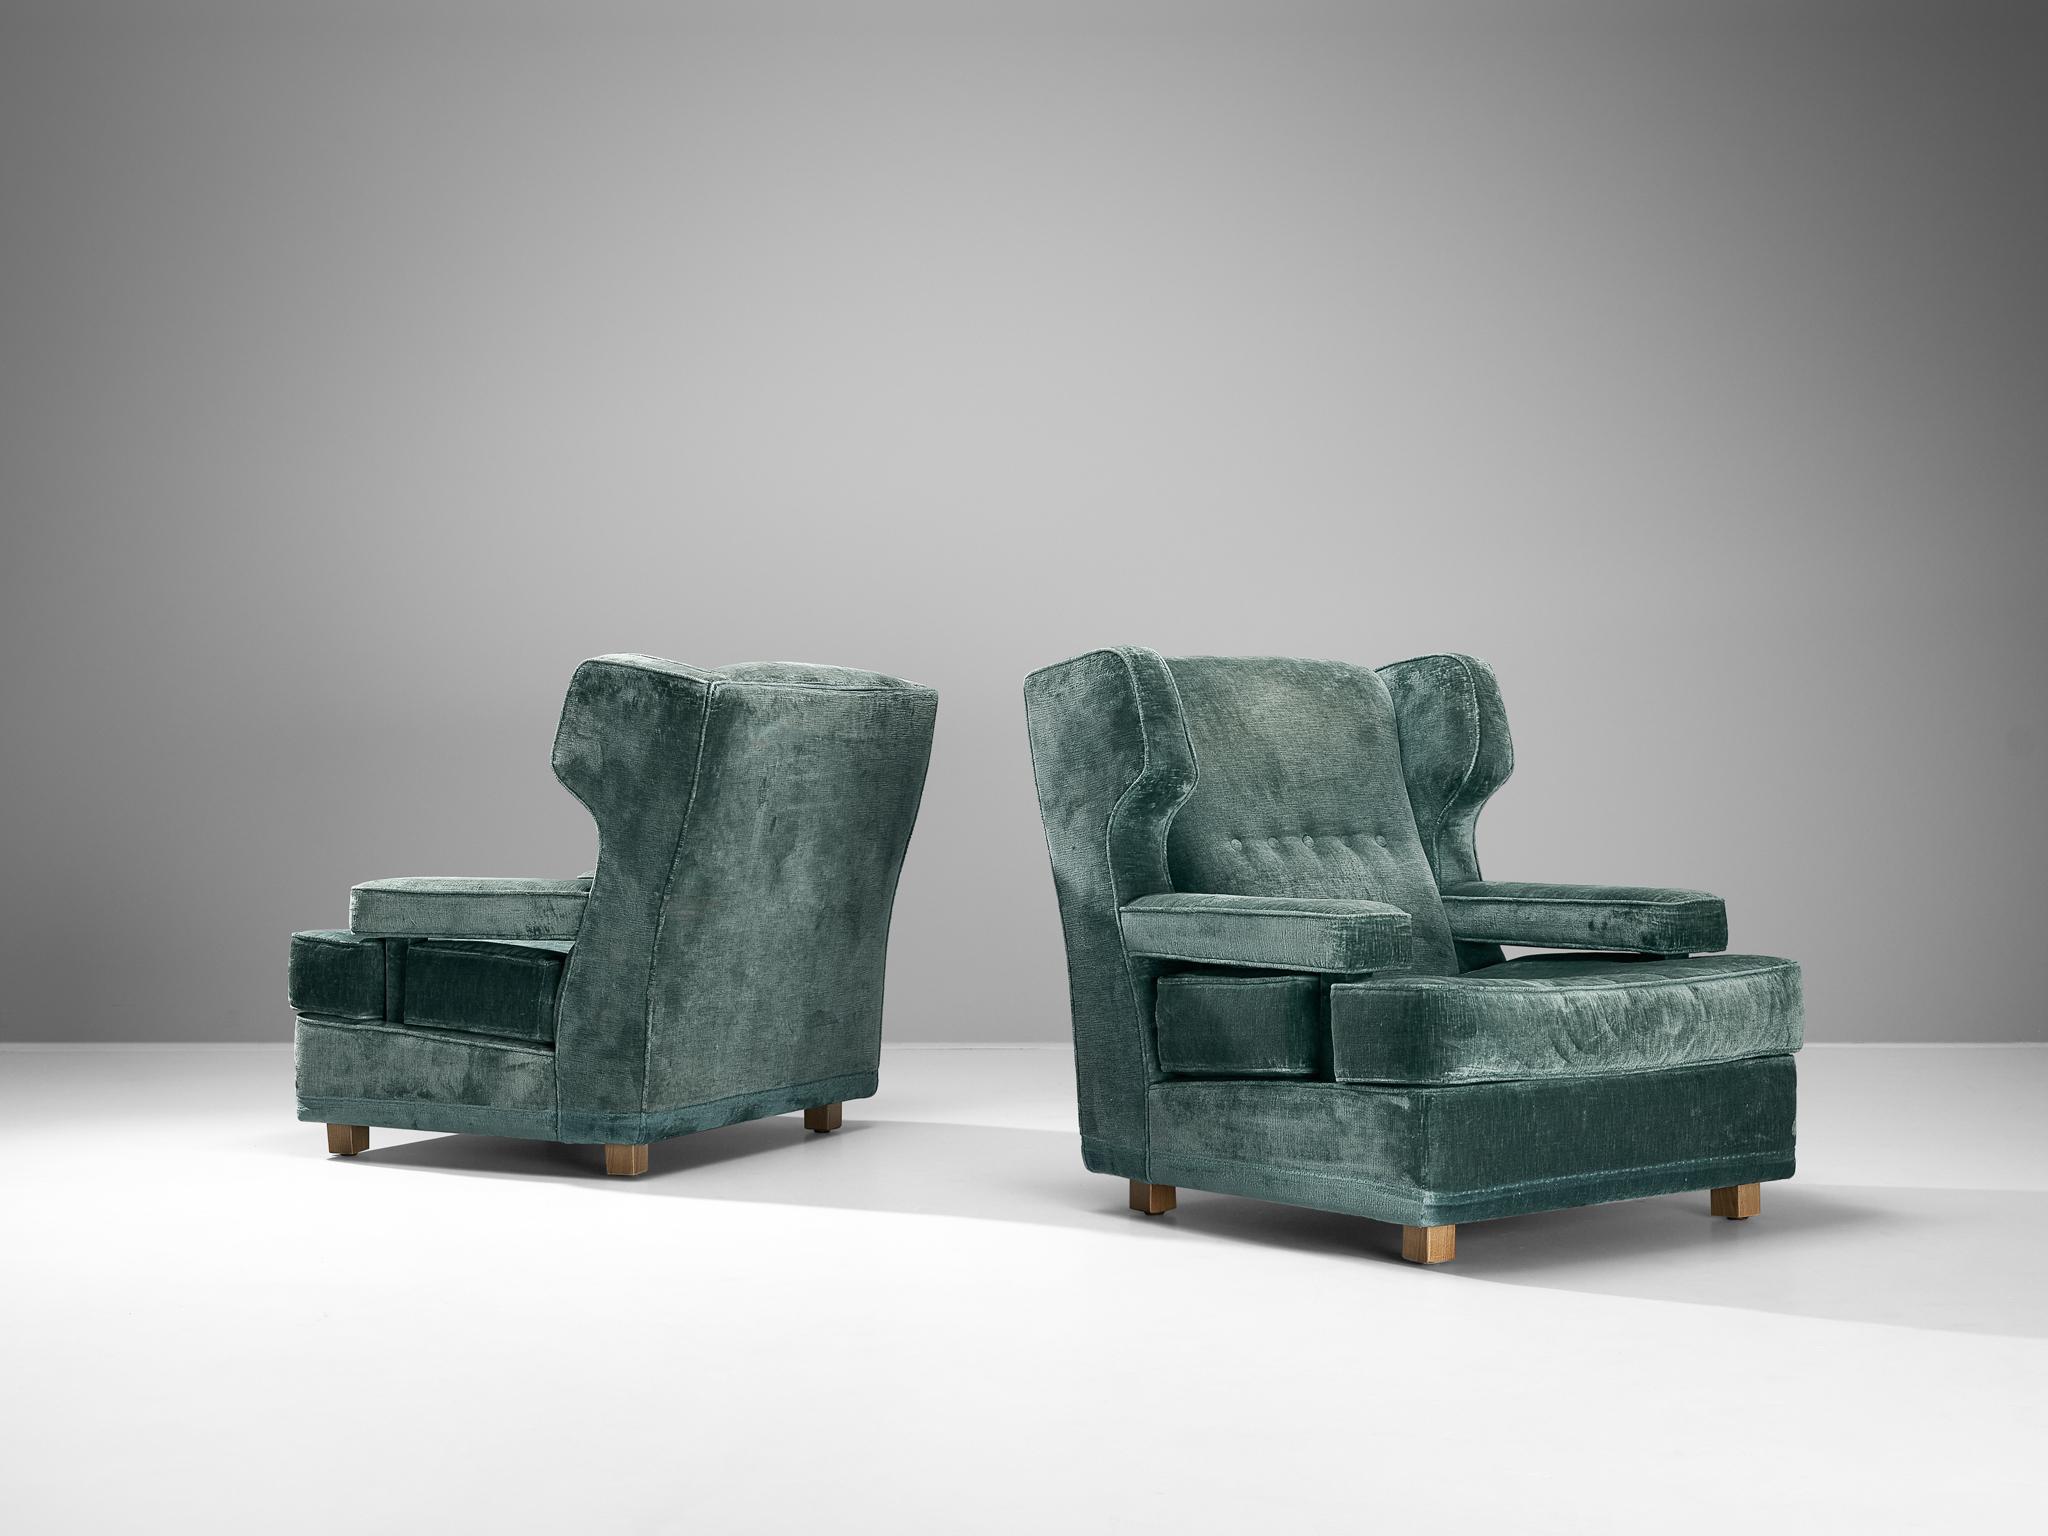 Pair of easy chairs, velvet, beech, Italy, 1940s

Made in Italy, these lounge chairs embrace a robust structure adorned with elegant ears and accentuated pointed corners. The inclined backrest, expansive armrests, and generous seat ensure the sitter